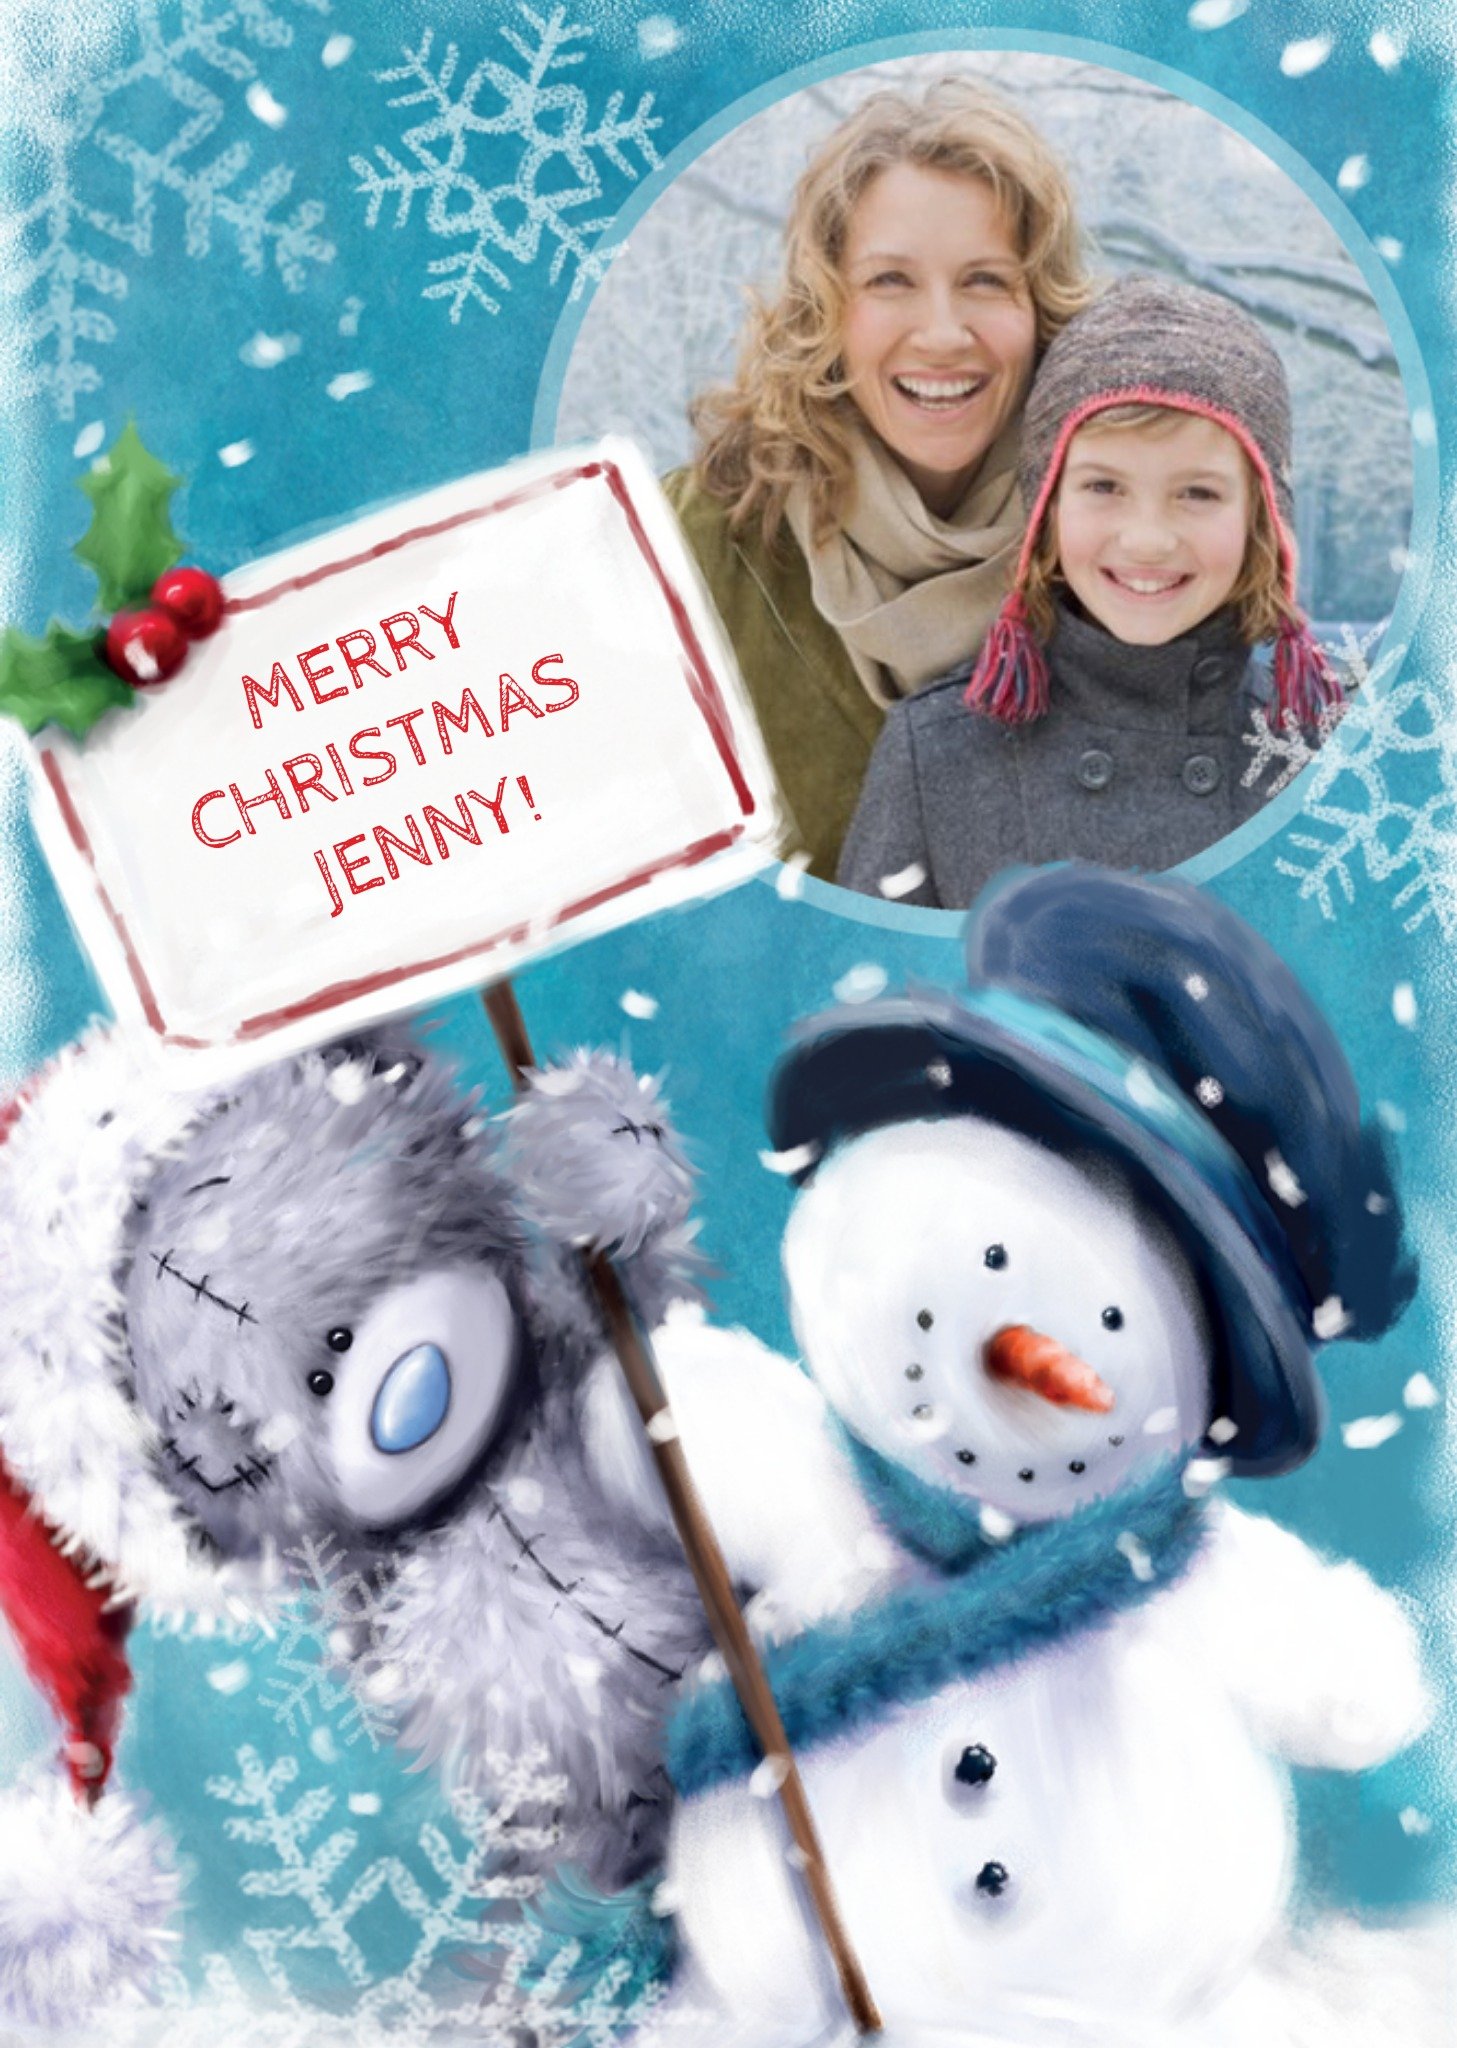 Me To You Tatty Teddy With Snowman Snowflakes Personalised Photo Upload Merry Christmas Card, Large